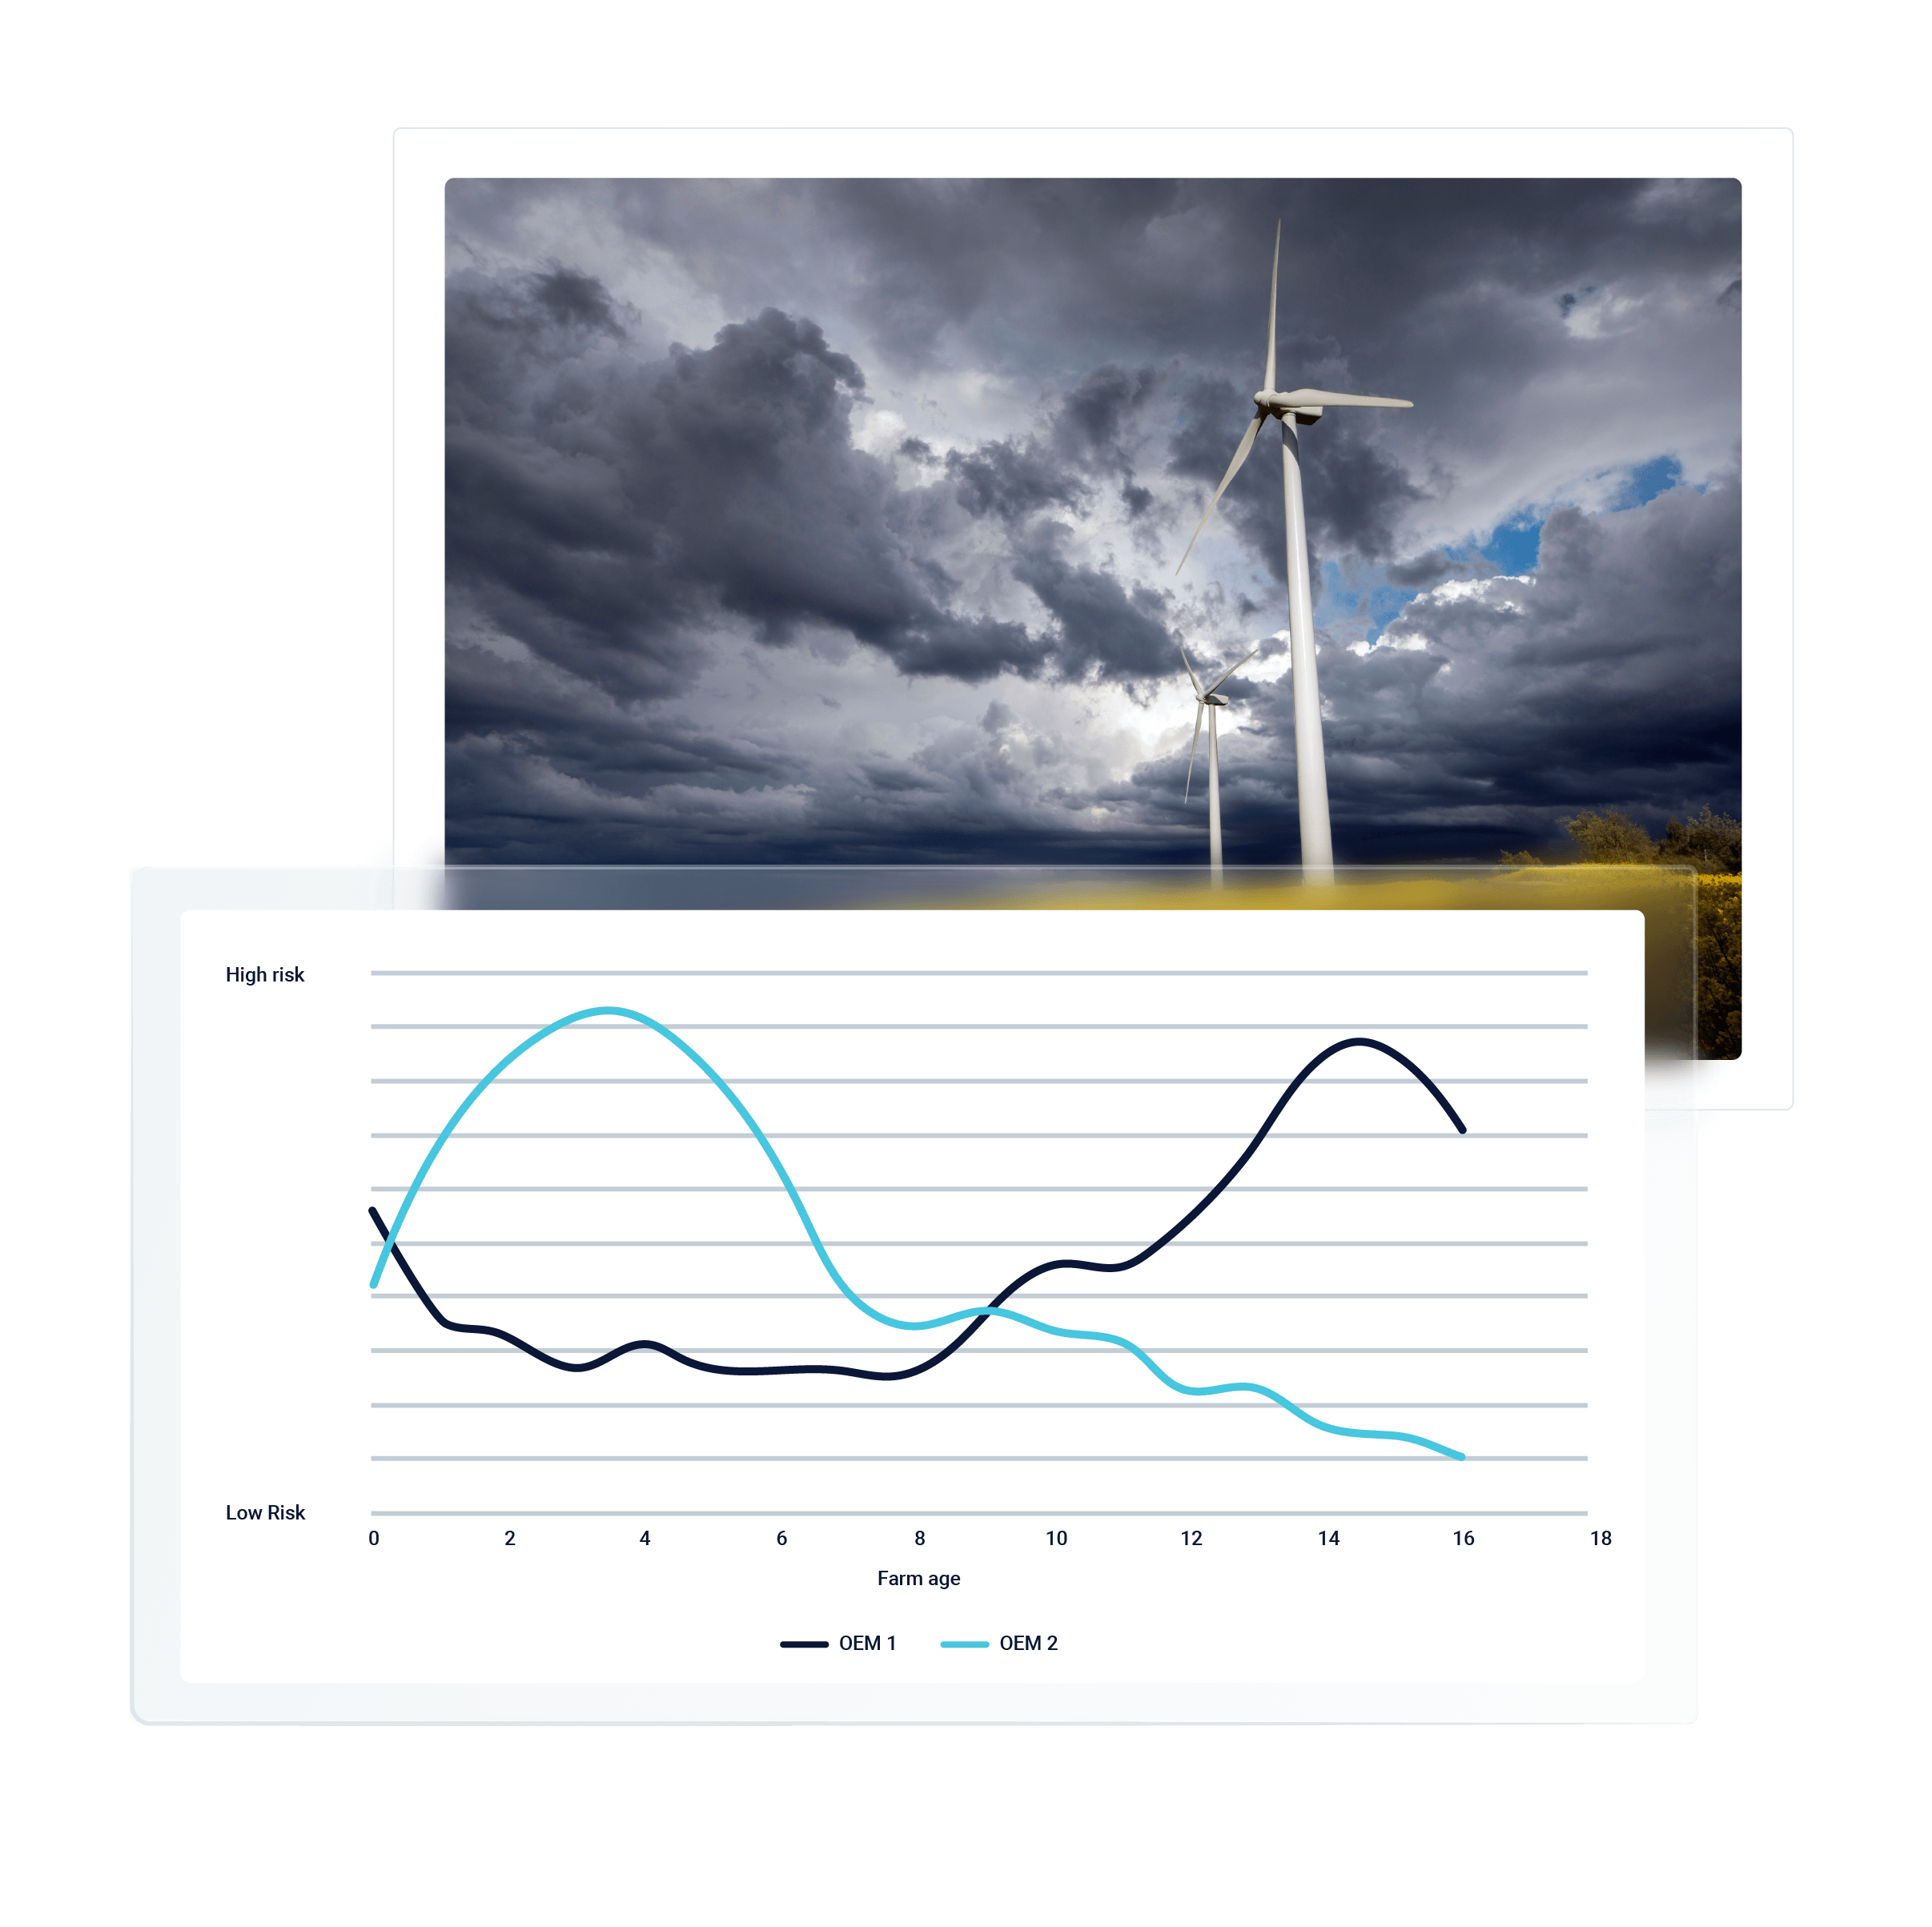 Wind turbines during a storm and a high and low risk line graph comparing OEMs